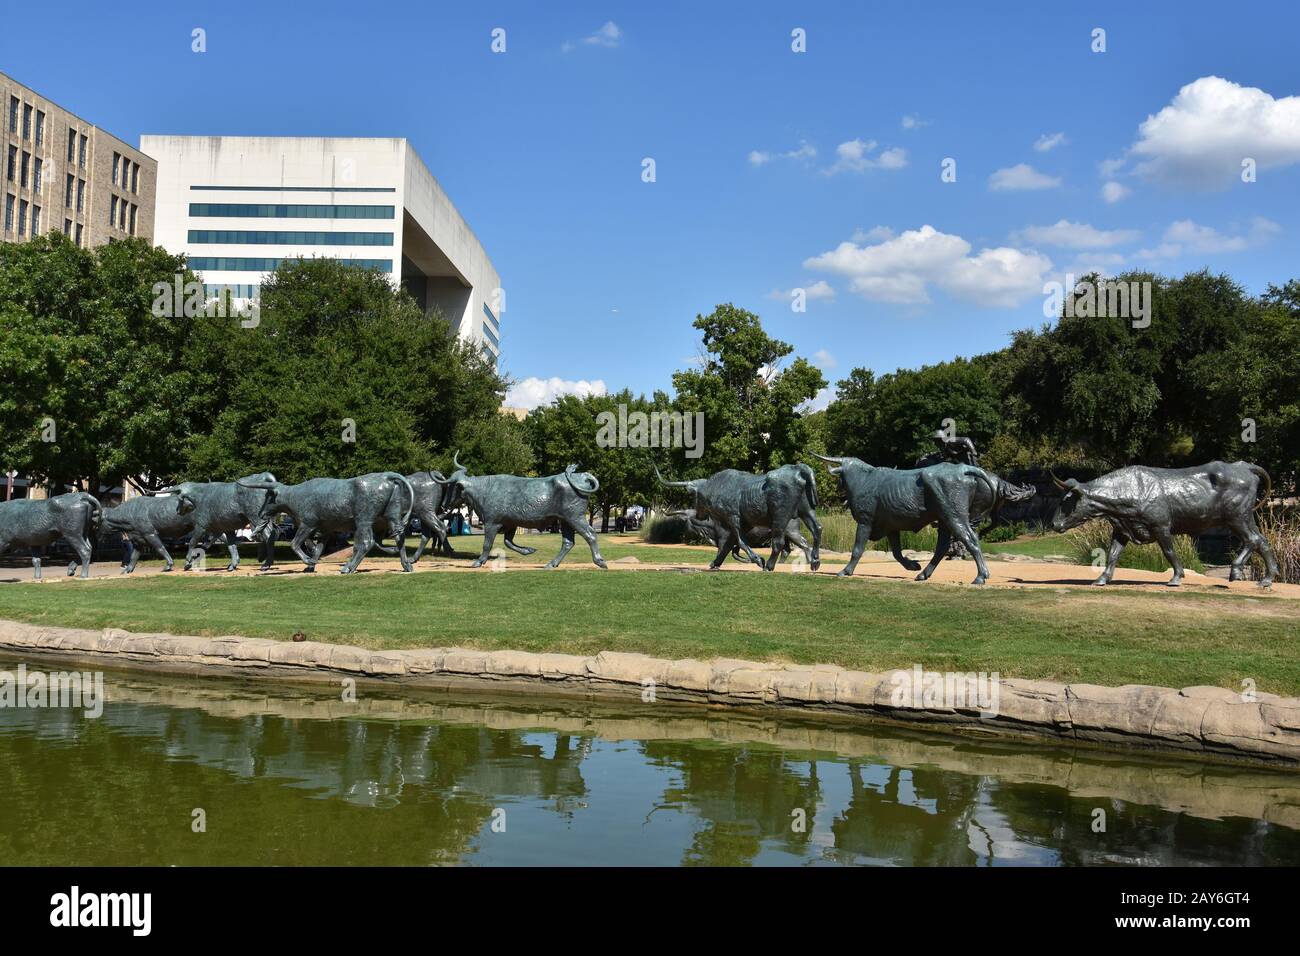 The Cattle Drive Sculpture at Pioneer Plaza in Dallas, Texas Stock Photo